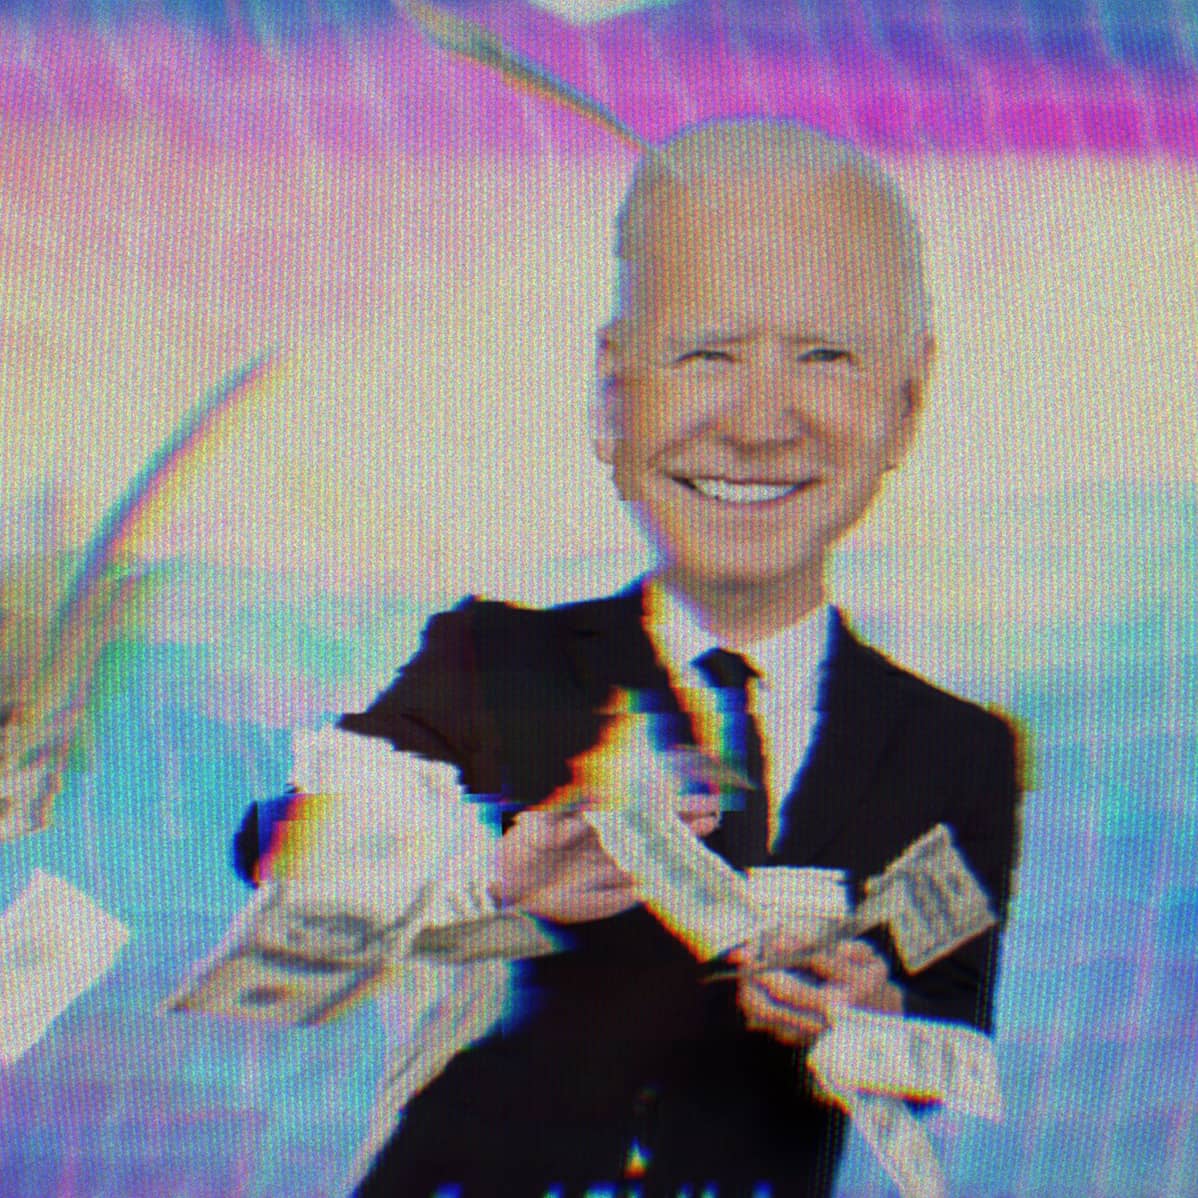 Joe Biden smiling and making it rain with a stack of cash.